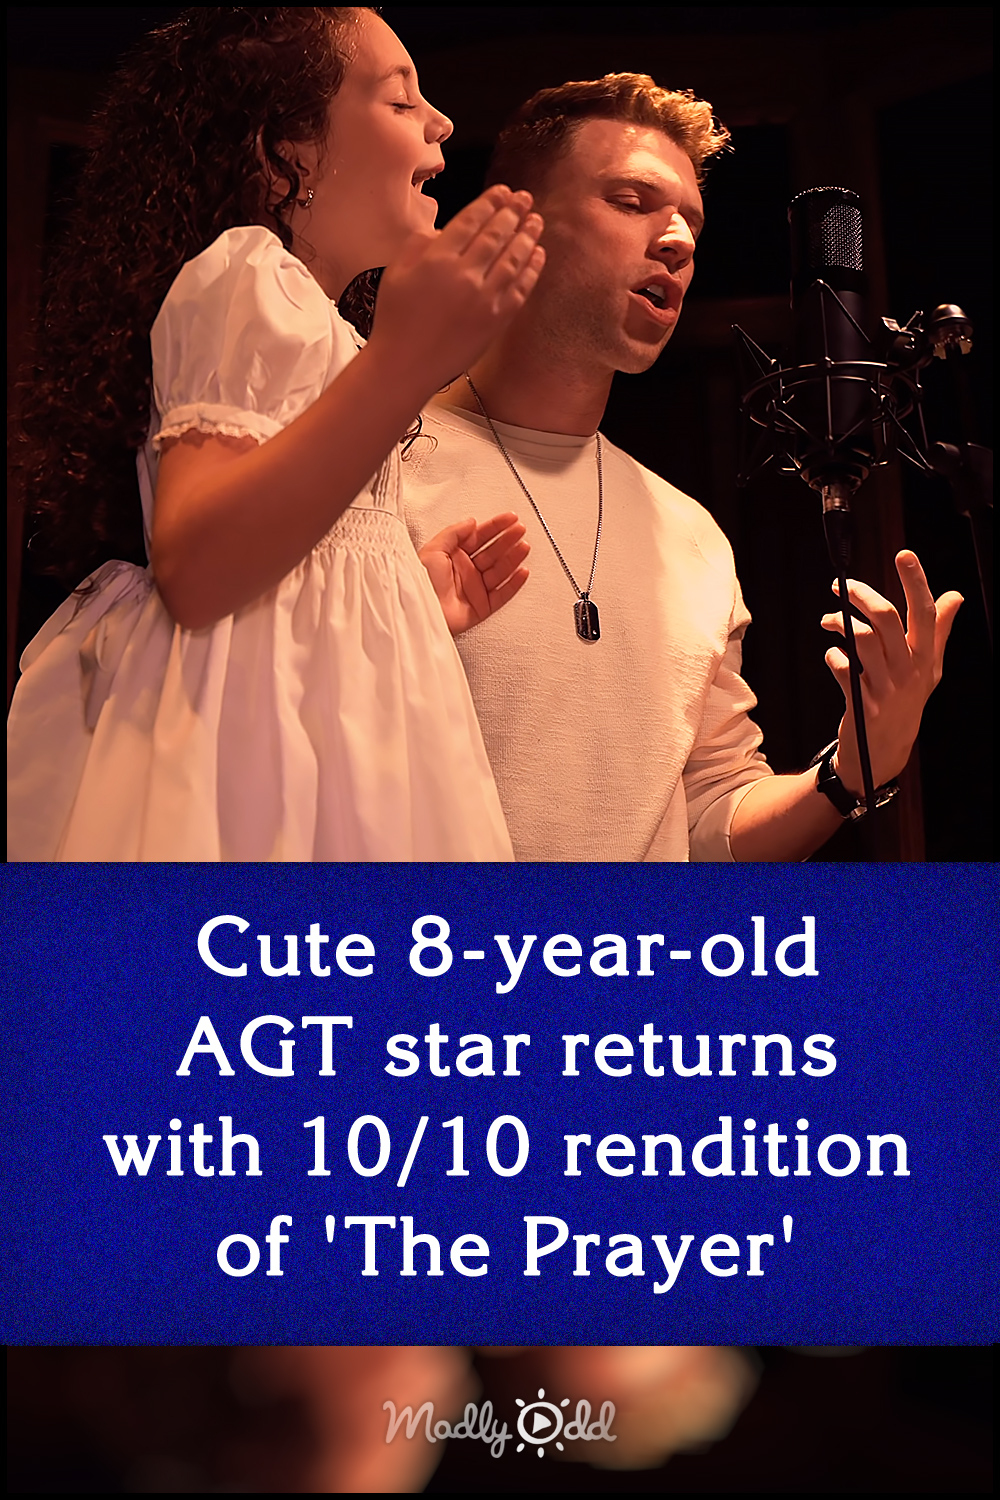 Cute 8-year-old AGT star returns with 10/10 rendition of \'The Prayer\'